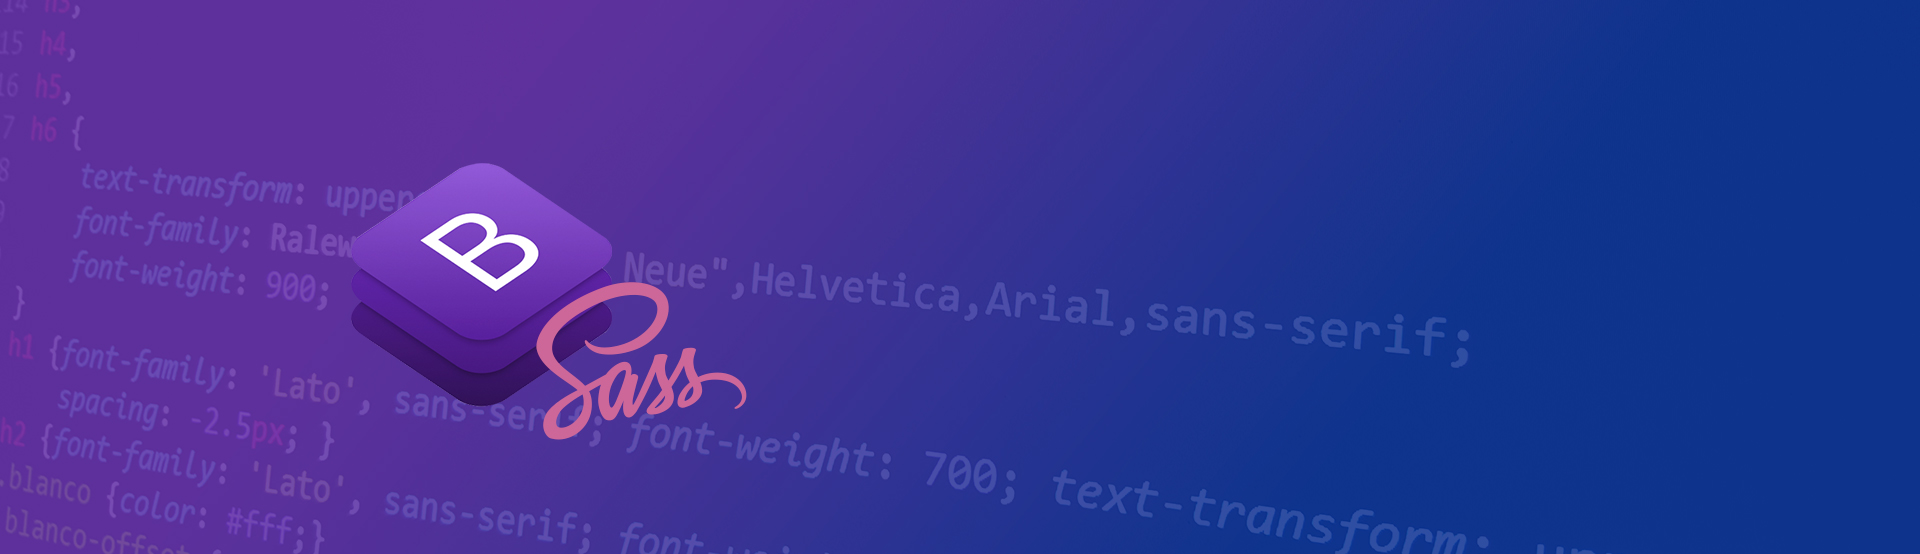 How To Override Bootstrap-Sass Using Sass Variables?